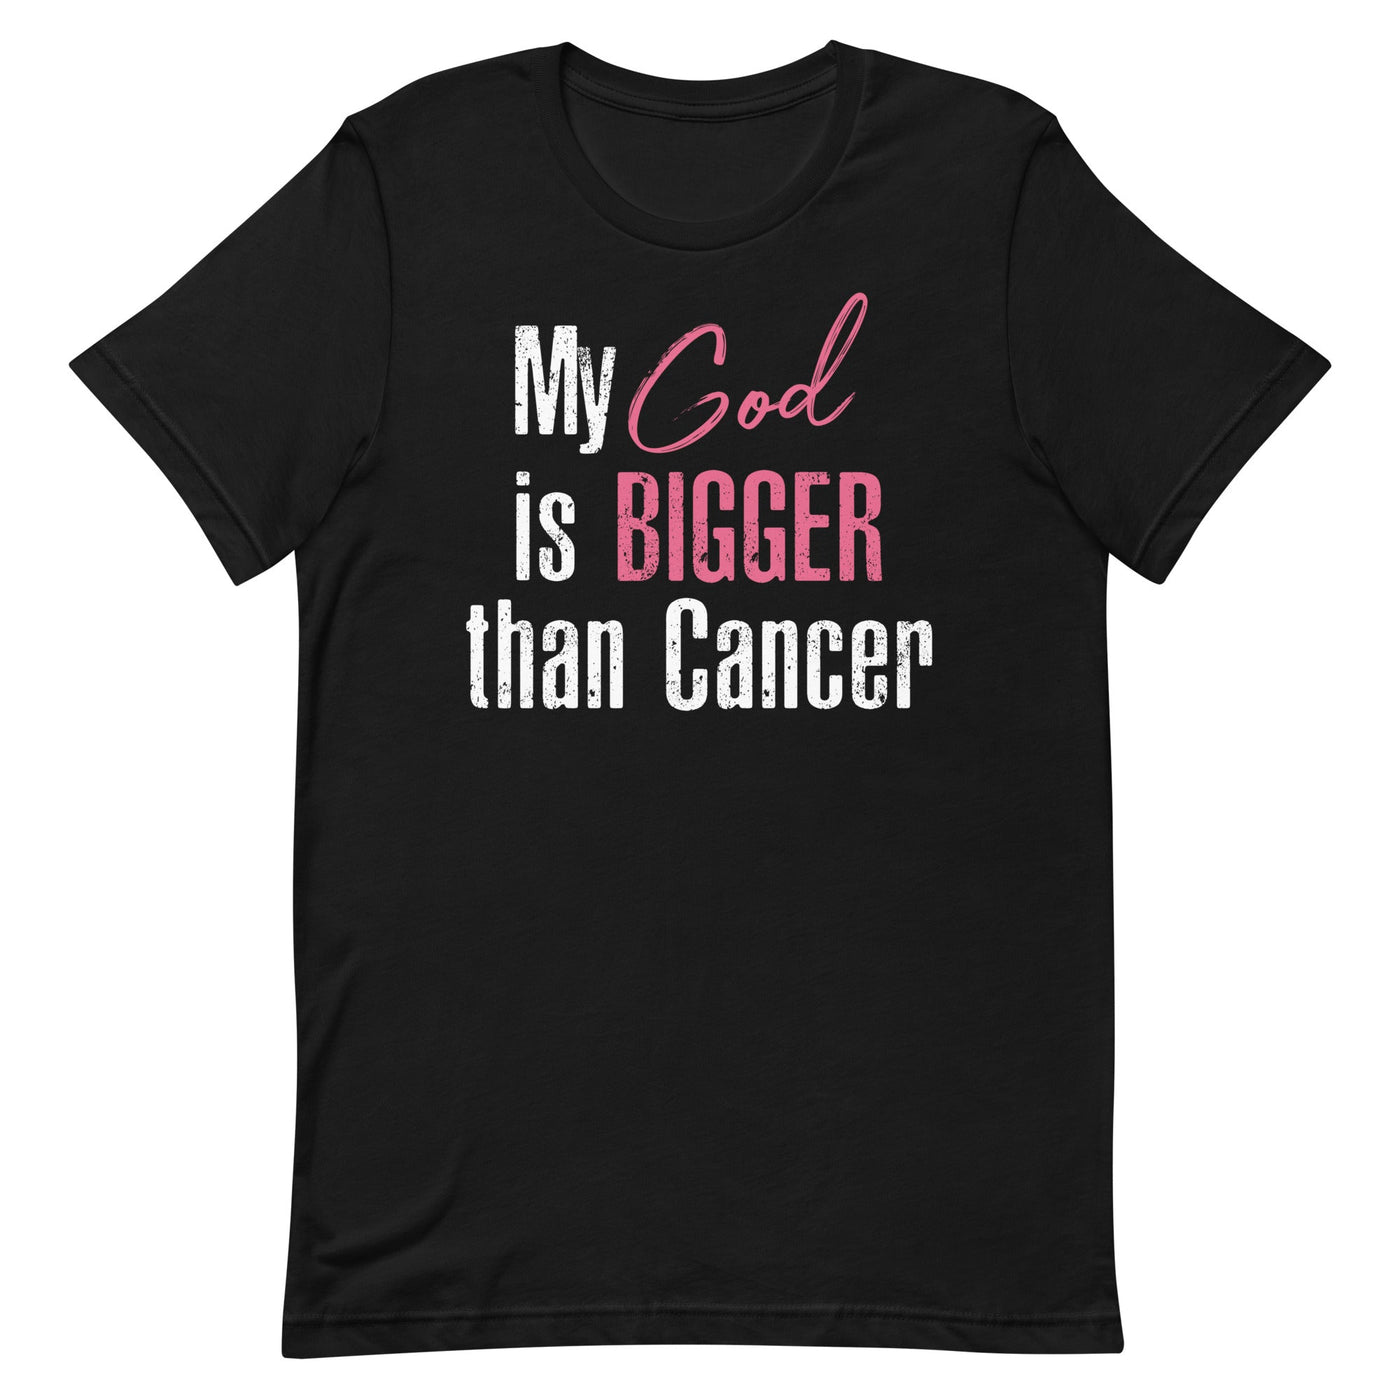 MY GOD IS BIGGER THAN CANCER WOMEN'S SHIRT - WHITE AND PINK FONT Black S 